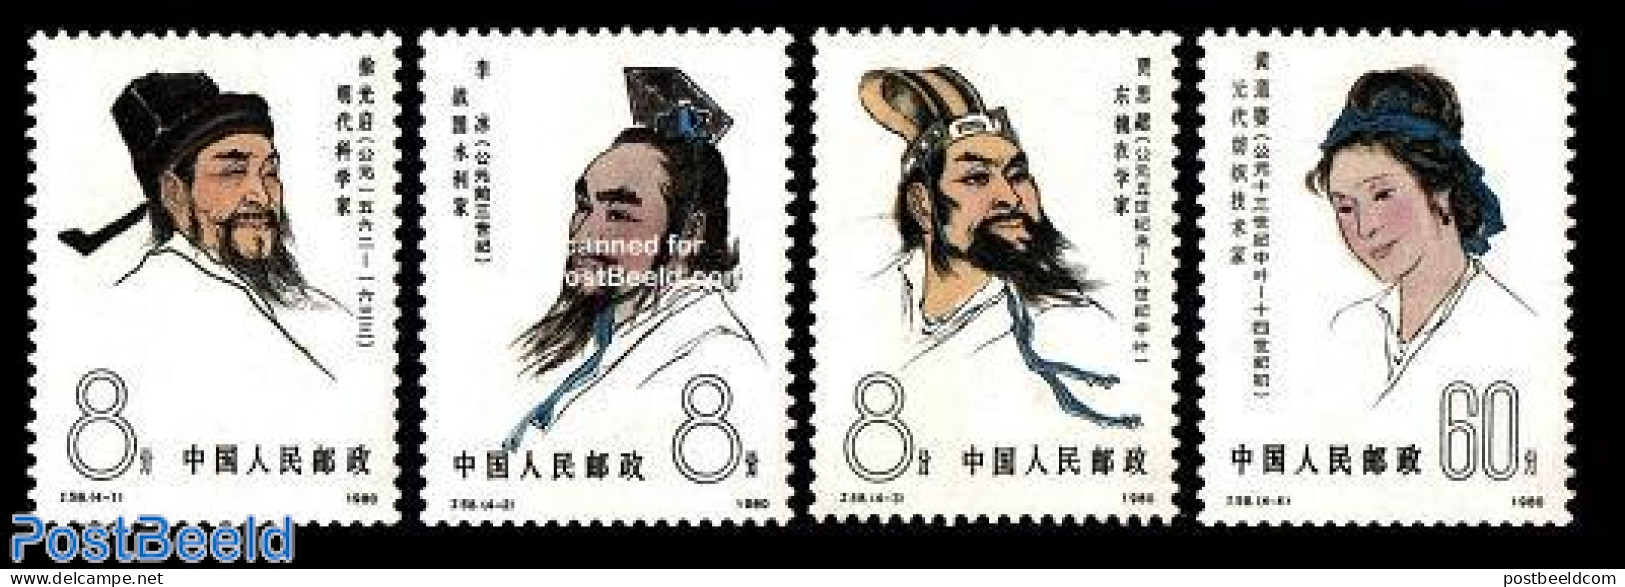 China People’s Republic 1980 Scientists 4v, Mint NH, Science - Astronomy - Ongebruikt